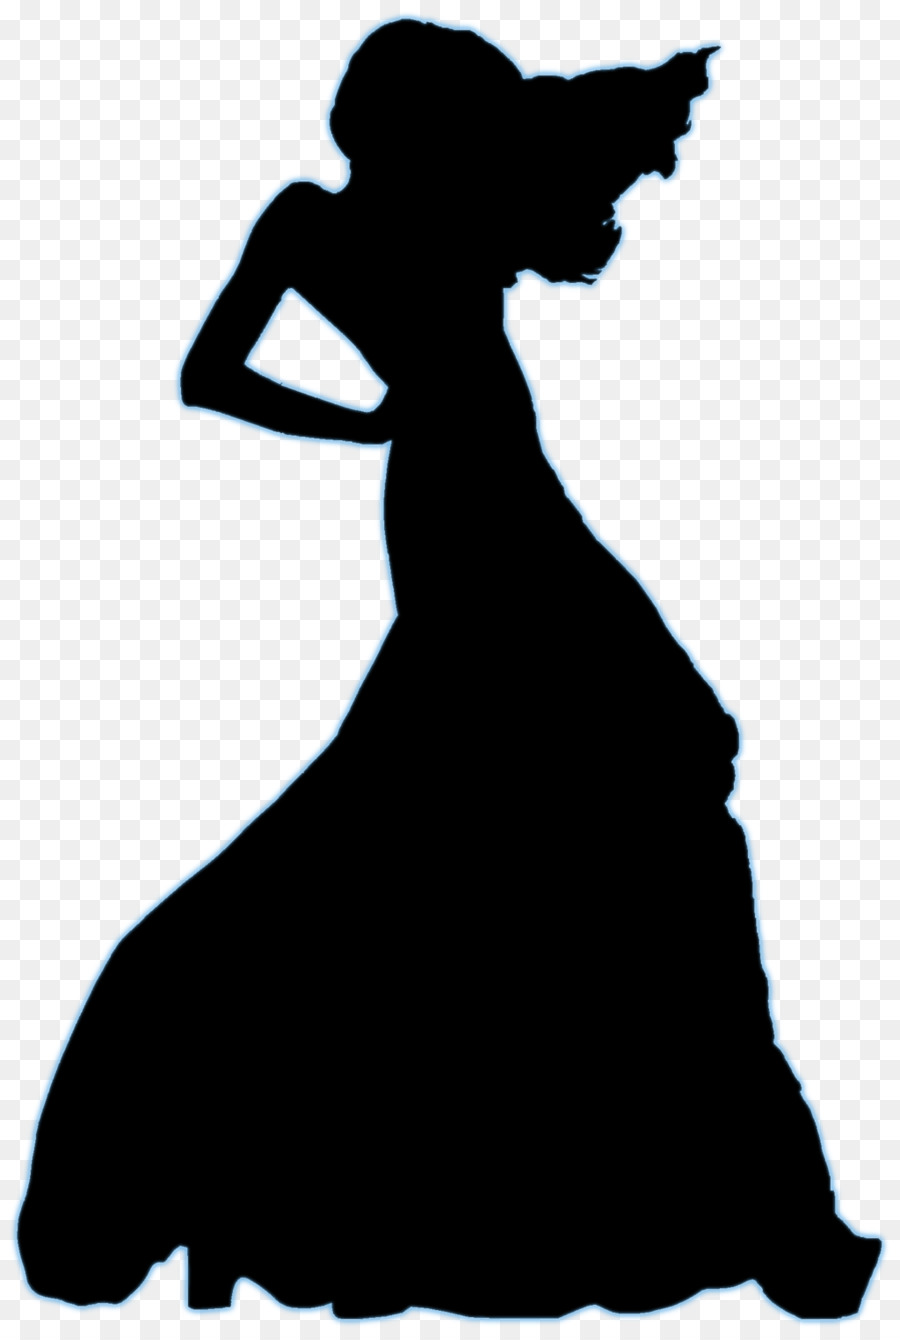 Silhouette Model Photography Clip art - woman silhouette png download - 1024*1524 - Free Transparent Silhouette png Download.